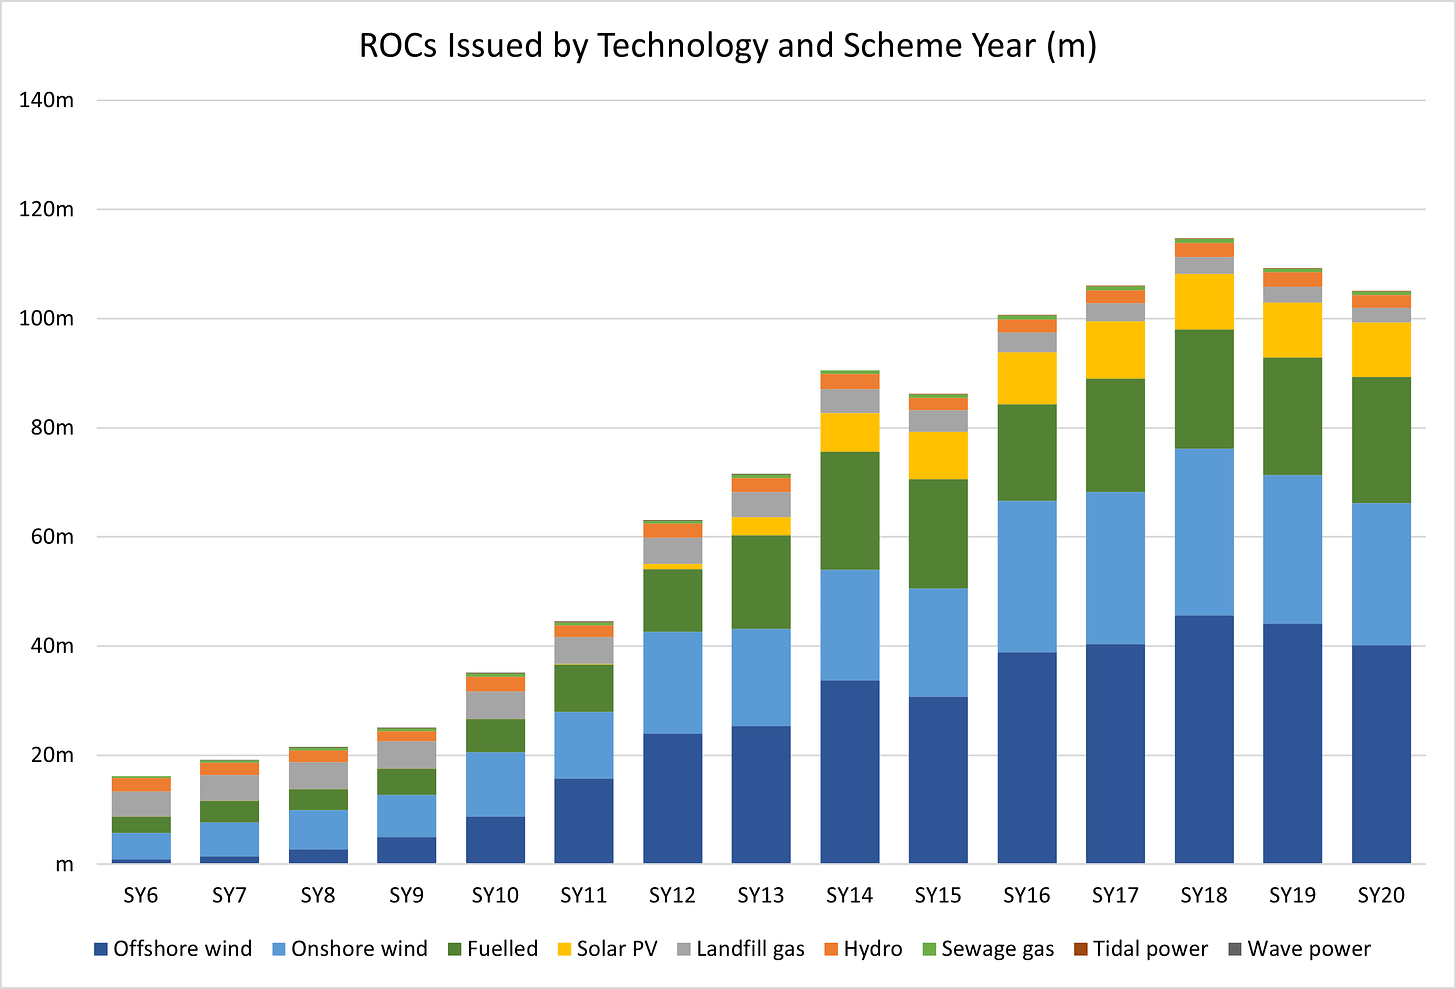 Figure 3 - ROCs Issued by Technology and Scheme Year (m)